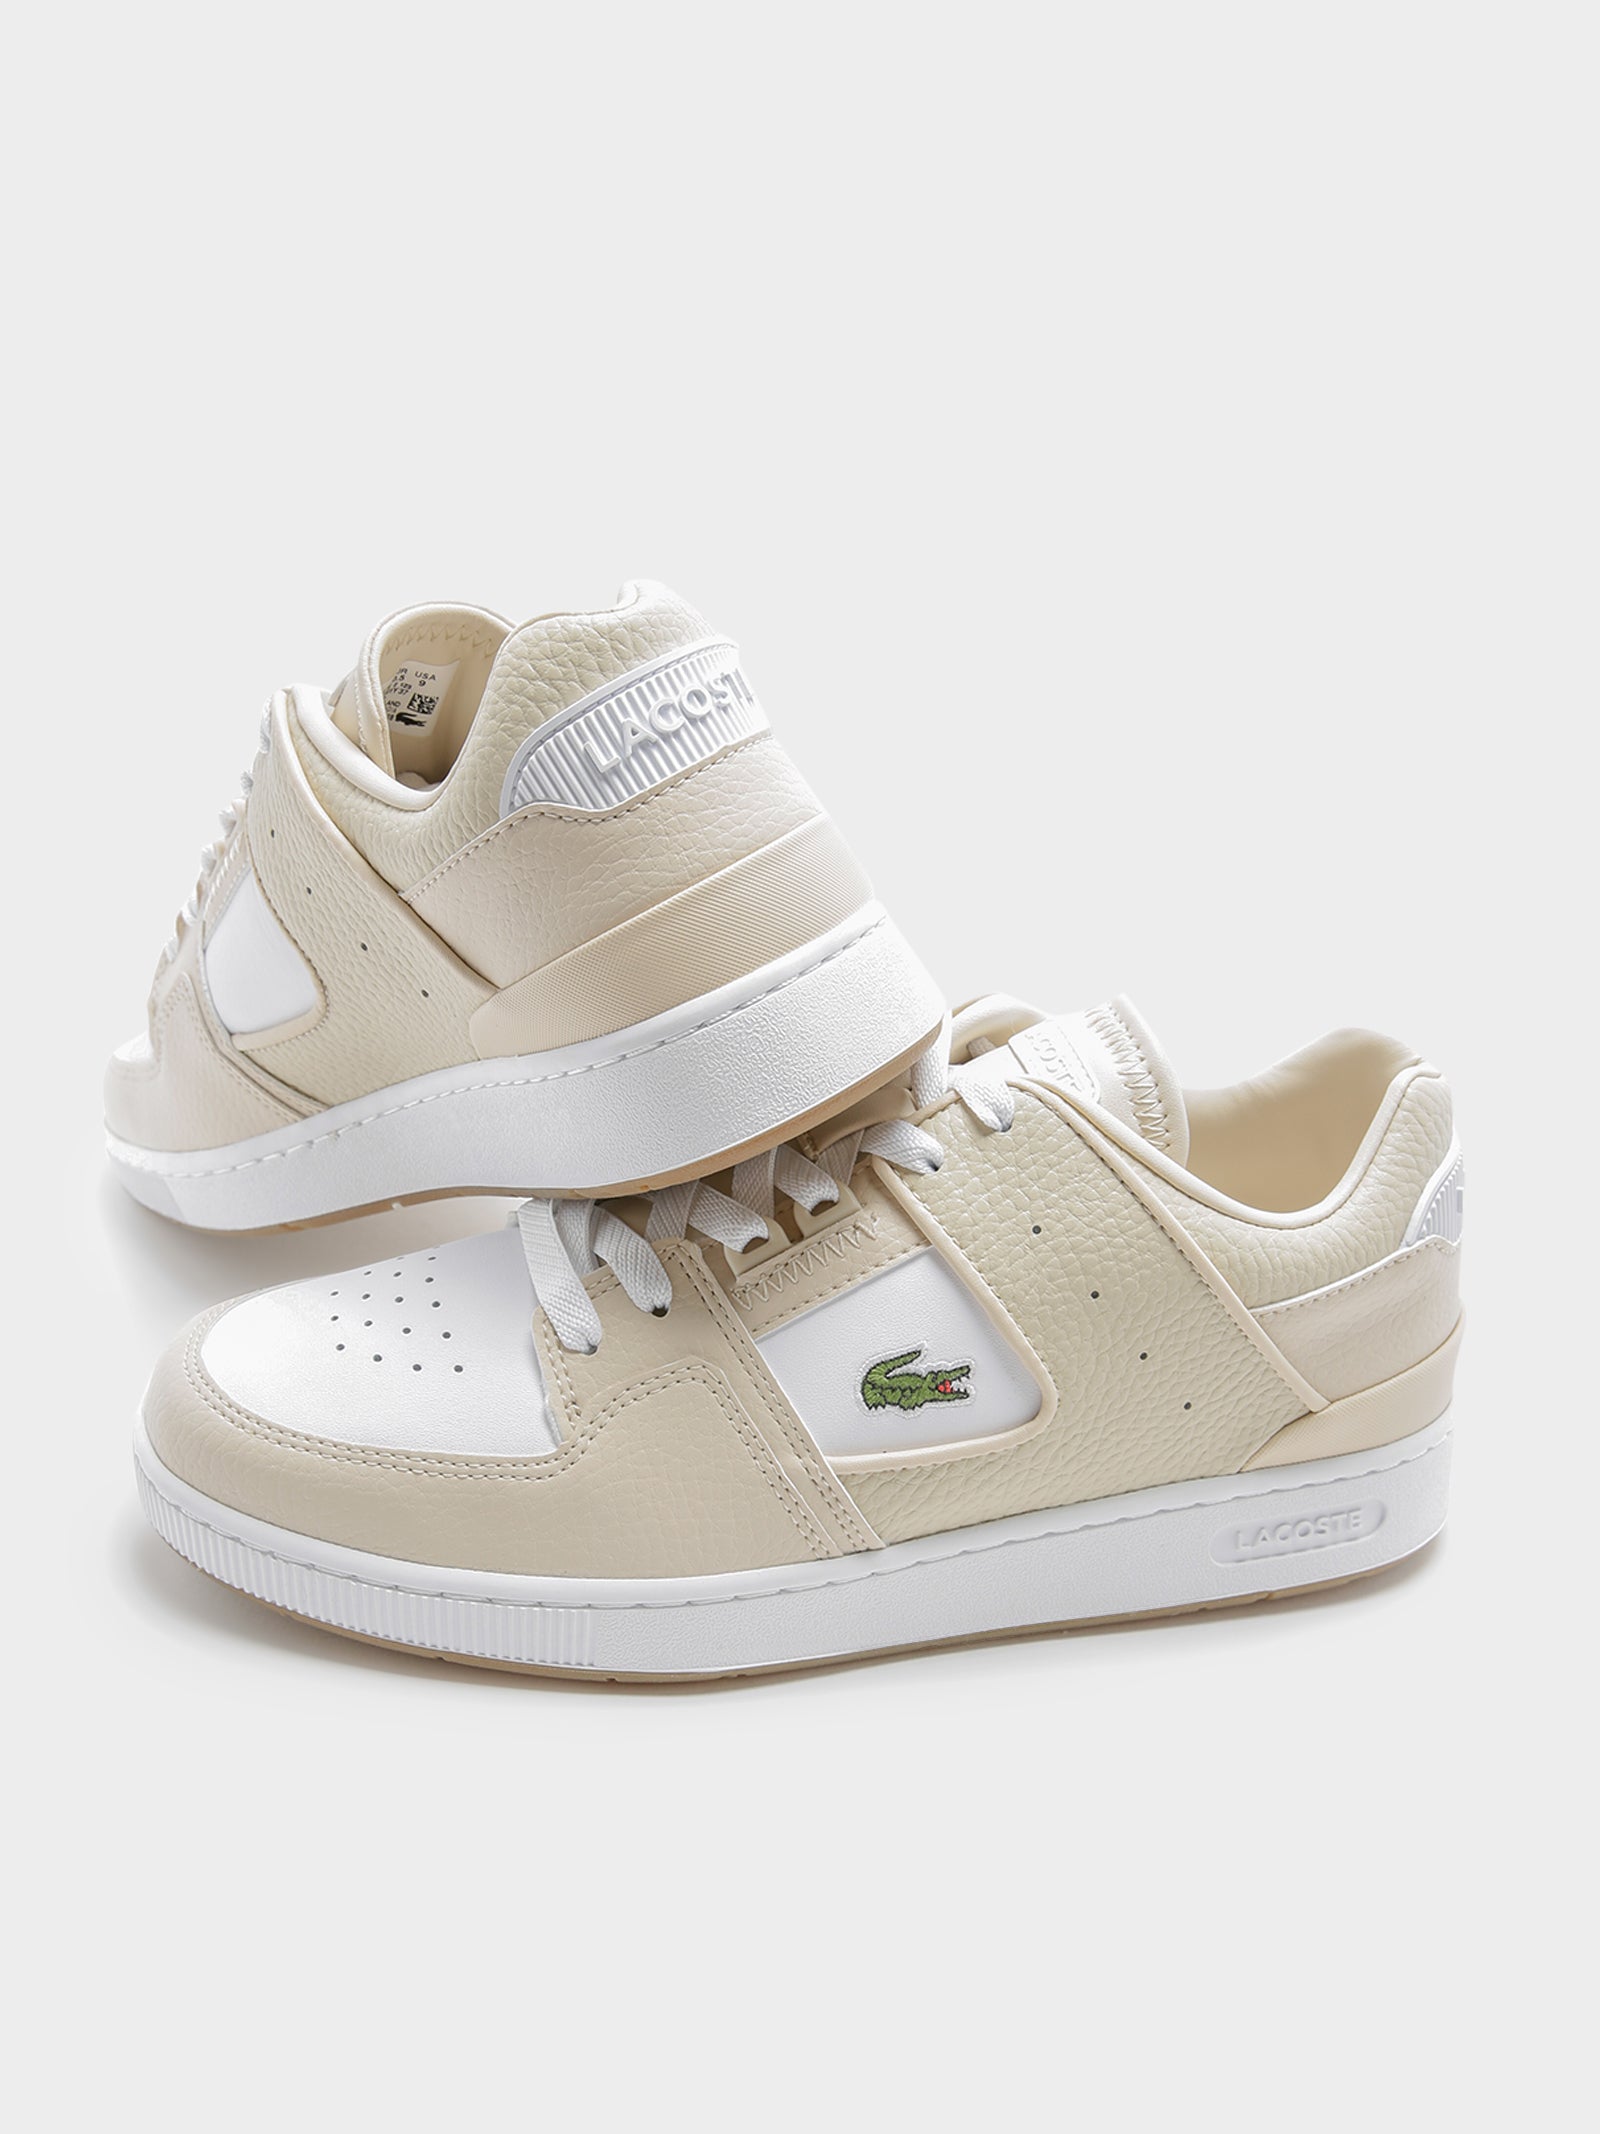 Womens Court Cage 2 123 Sneakers White Gum - Glue